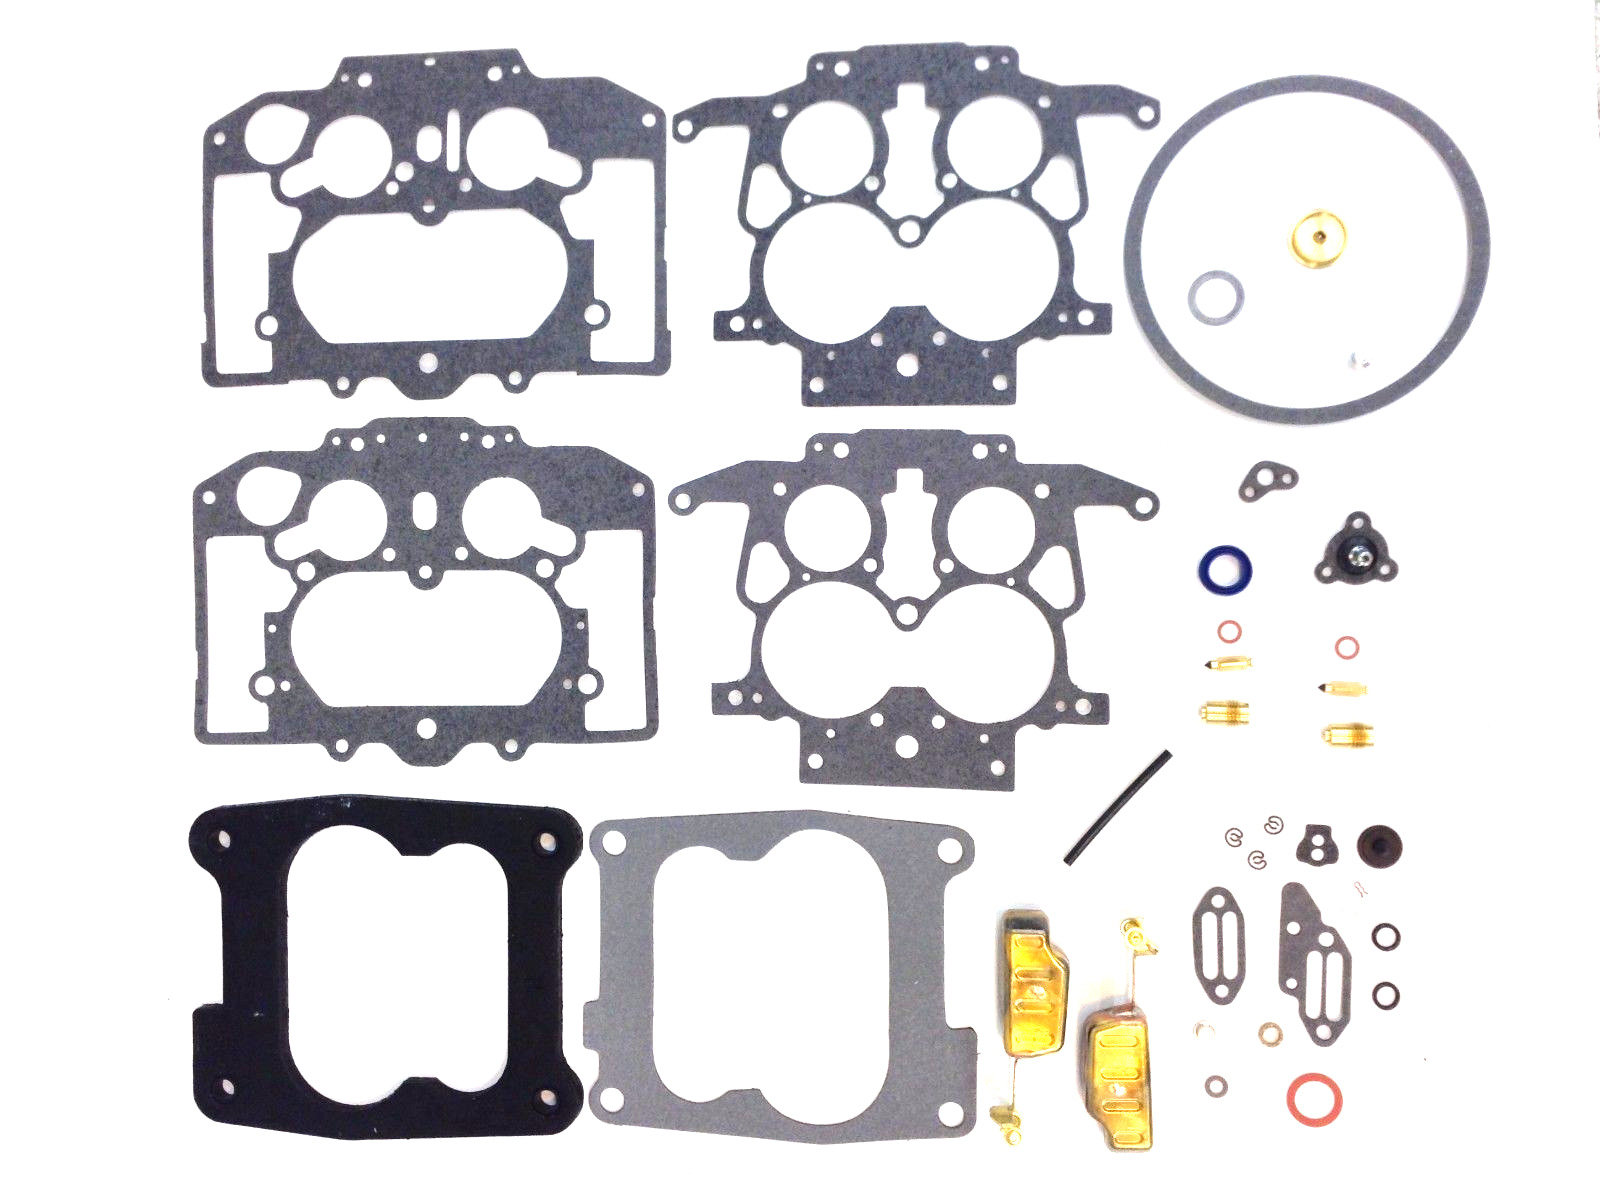 CARTER THERMOQUAD CARB KIT 1972-77 CHRYSLER DODGE PLYMOUTH 340 383 440 W/Float